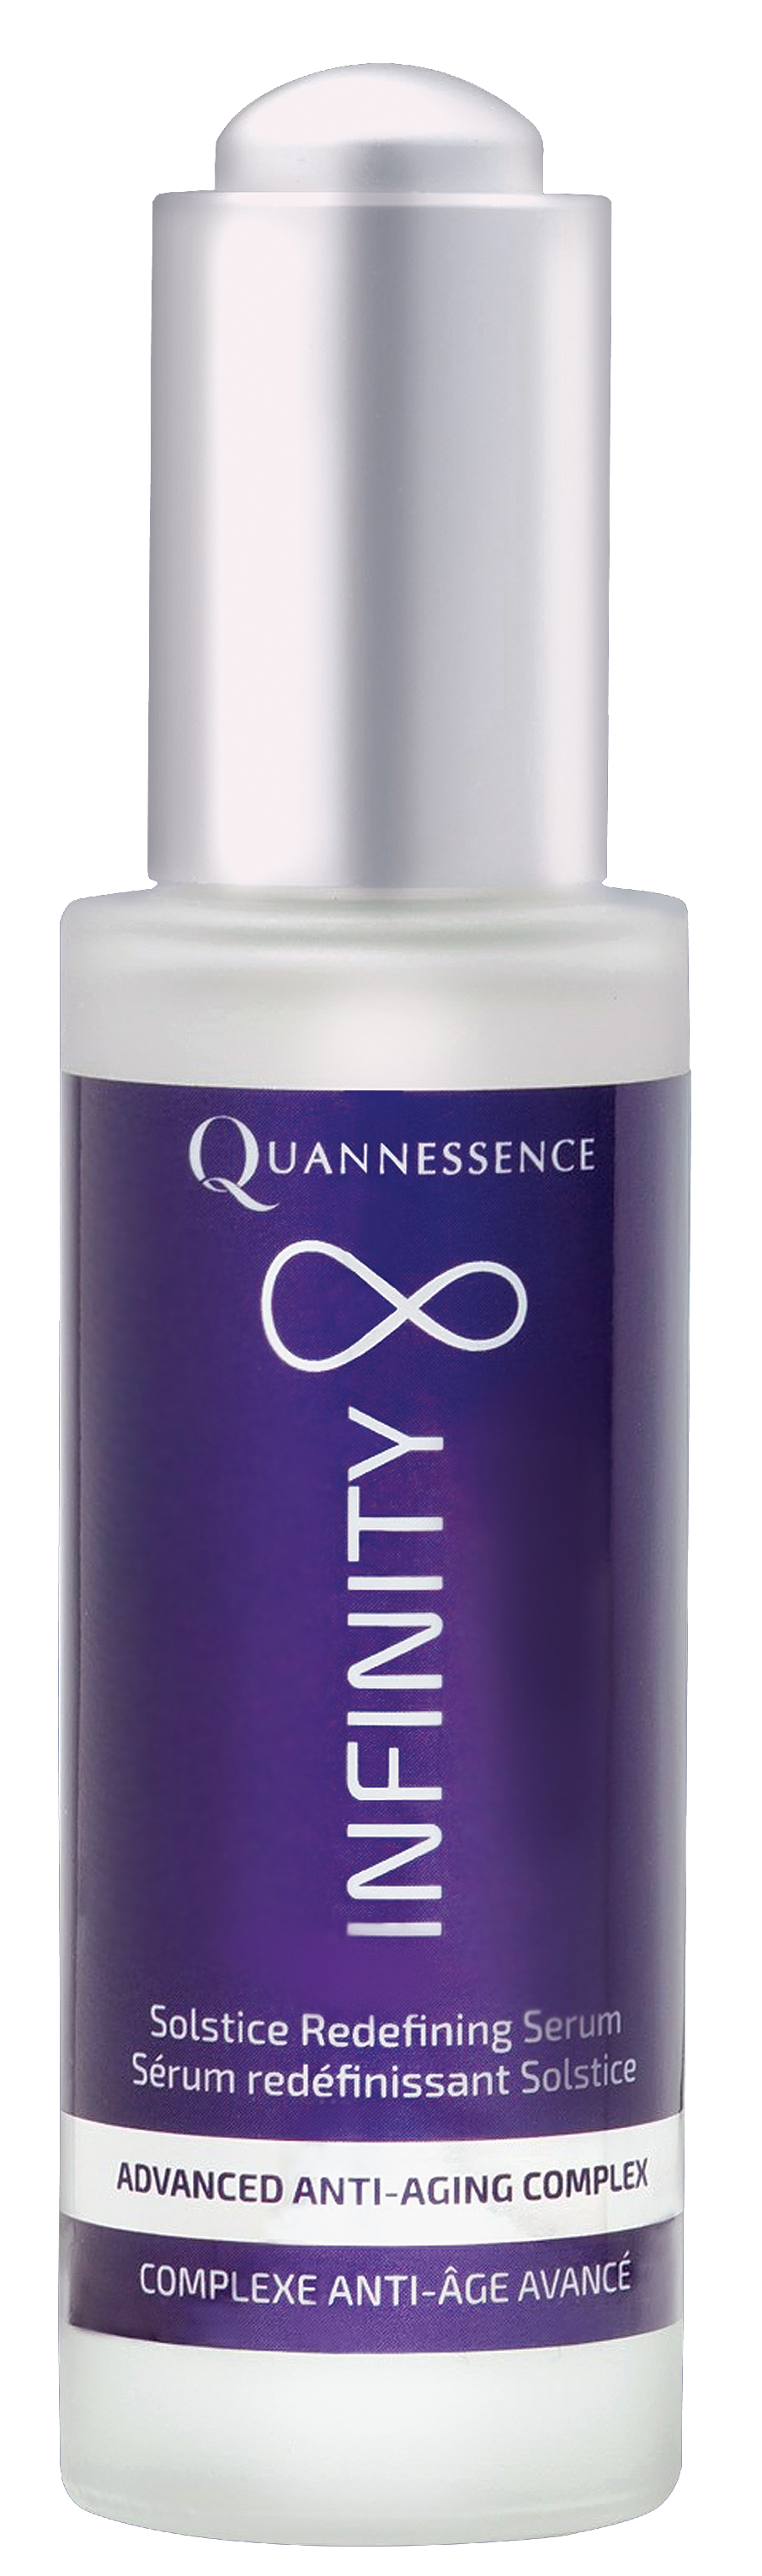 Quannessence Infinity Solstice Redefining Serum